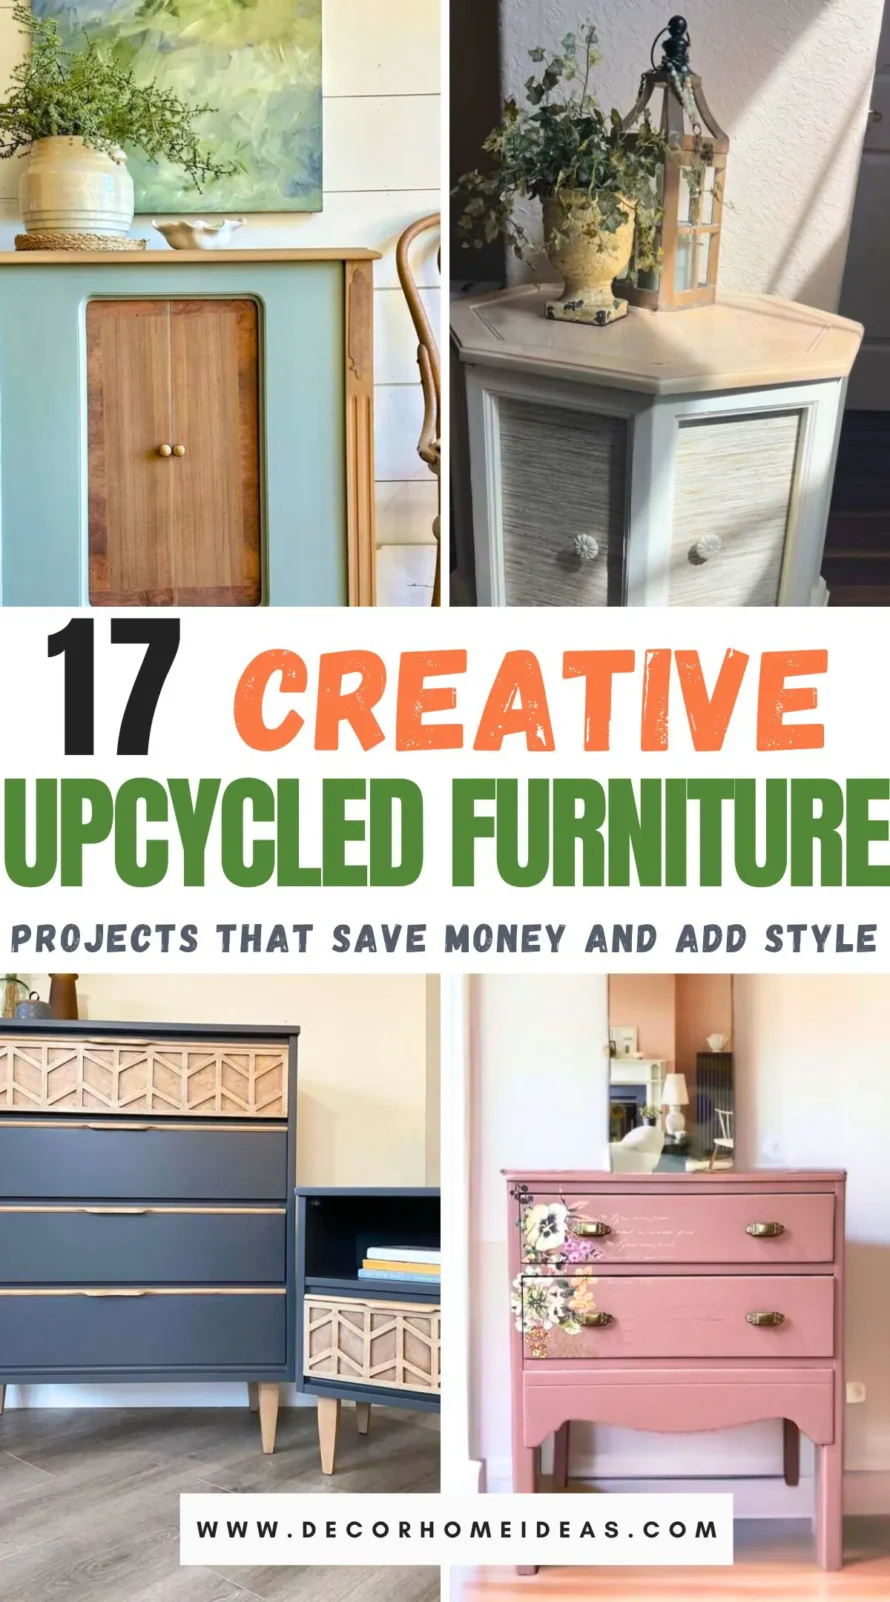 Discover 17 ingenious upcycled furniture projects that effortlessly blend style with sustainability. From transforming old doors into chic tables to turning pallets into stylish outdoor seating, these DIY ideas not only save money but also give your home a unique, personalized touch. Explore now and get inspired to revamp your space creatively!